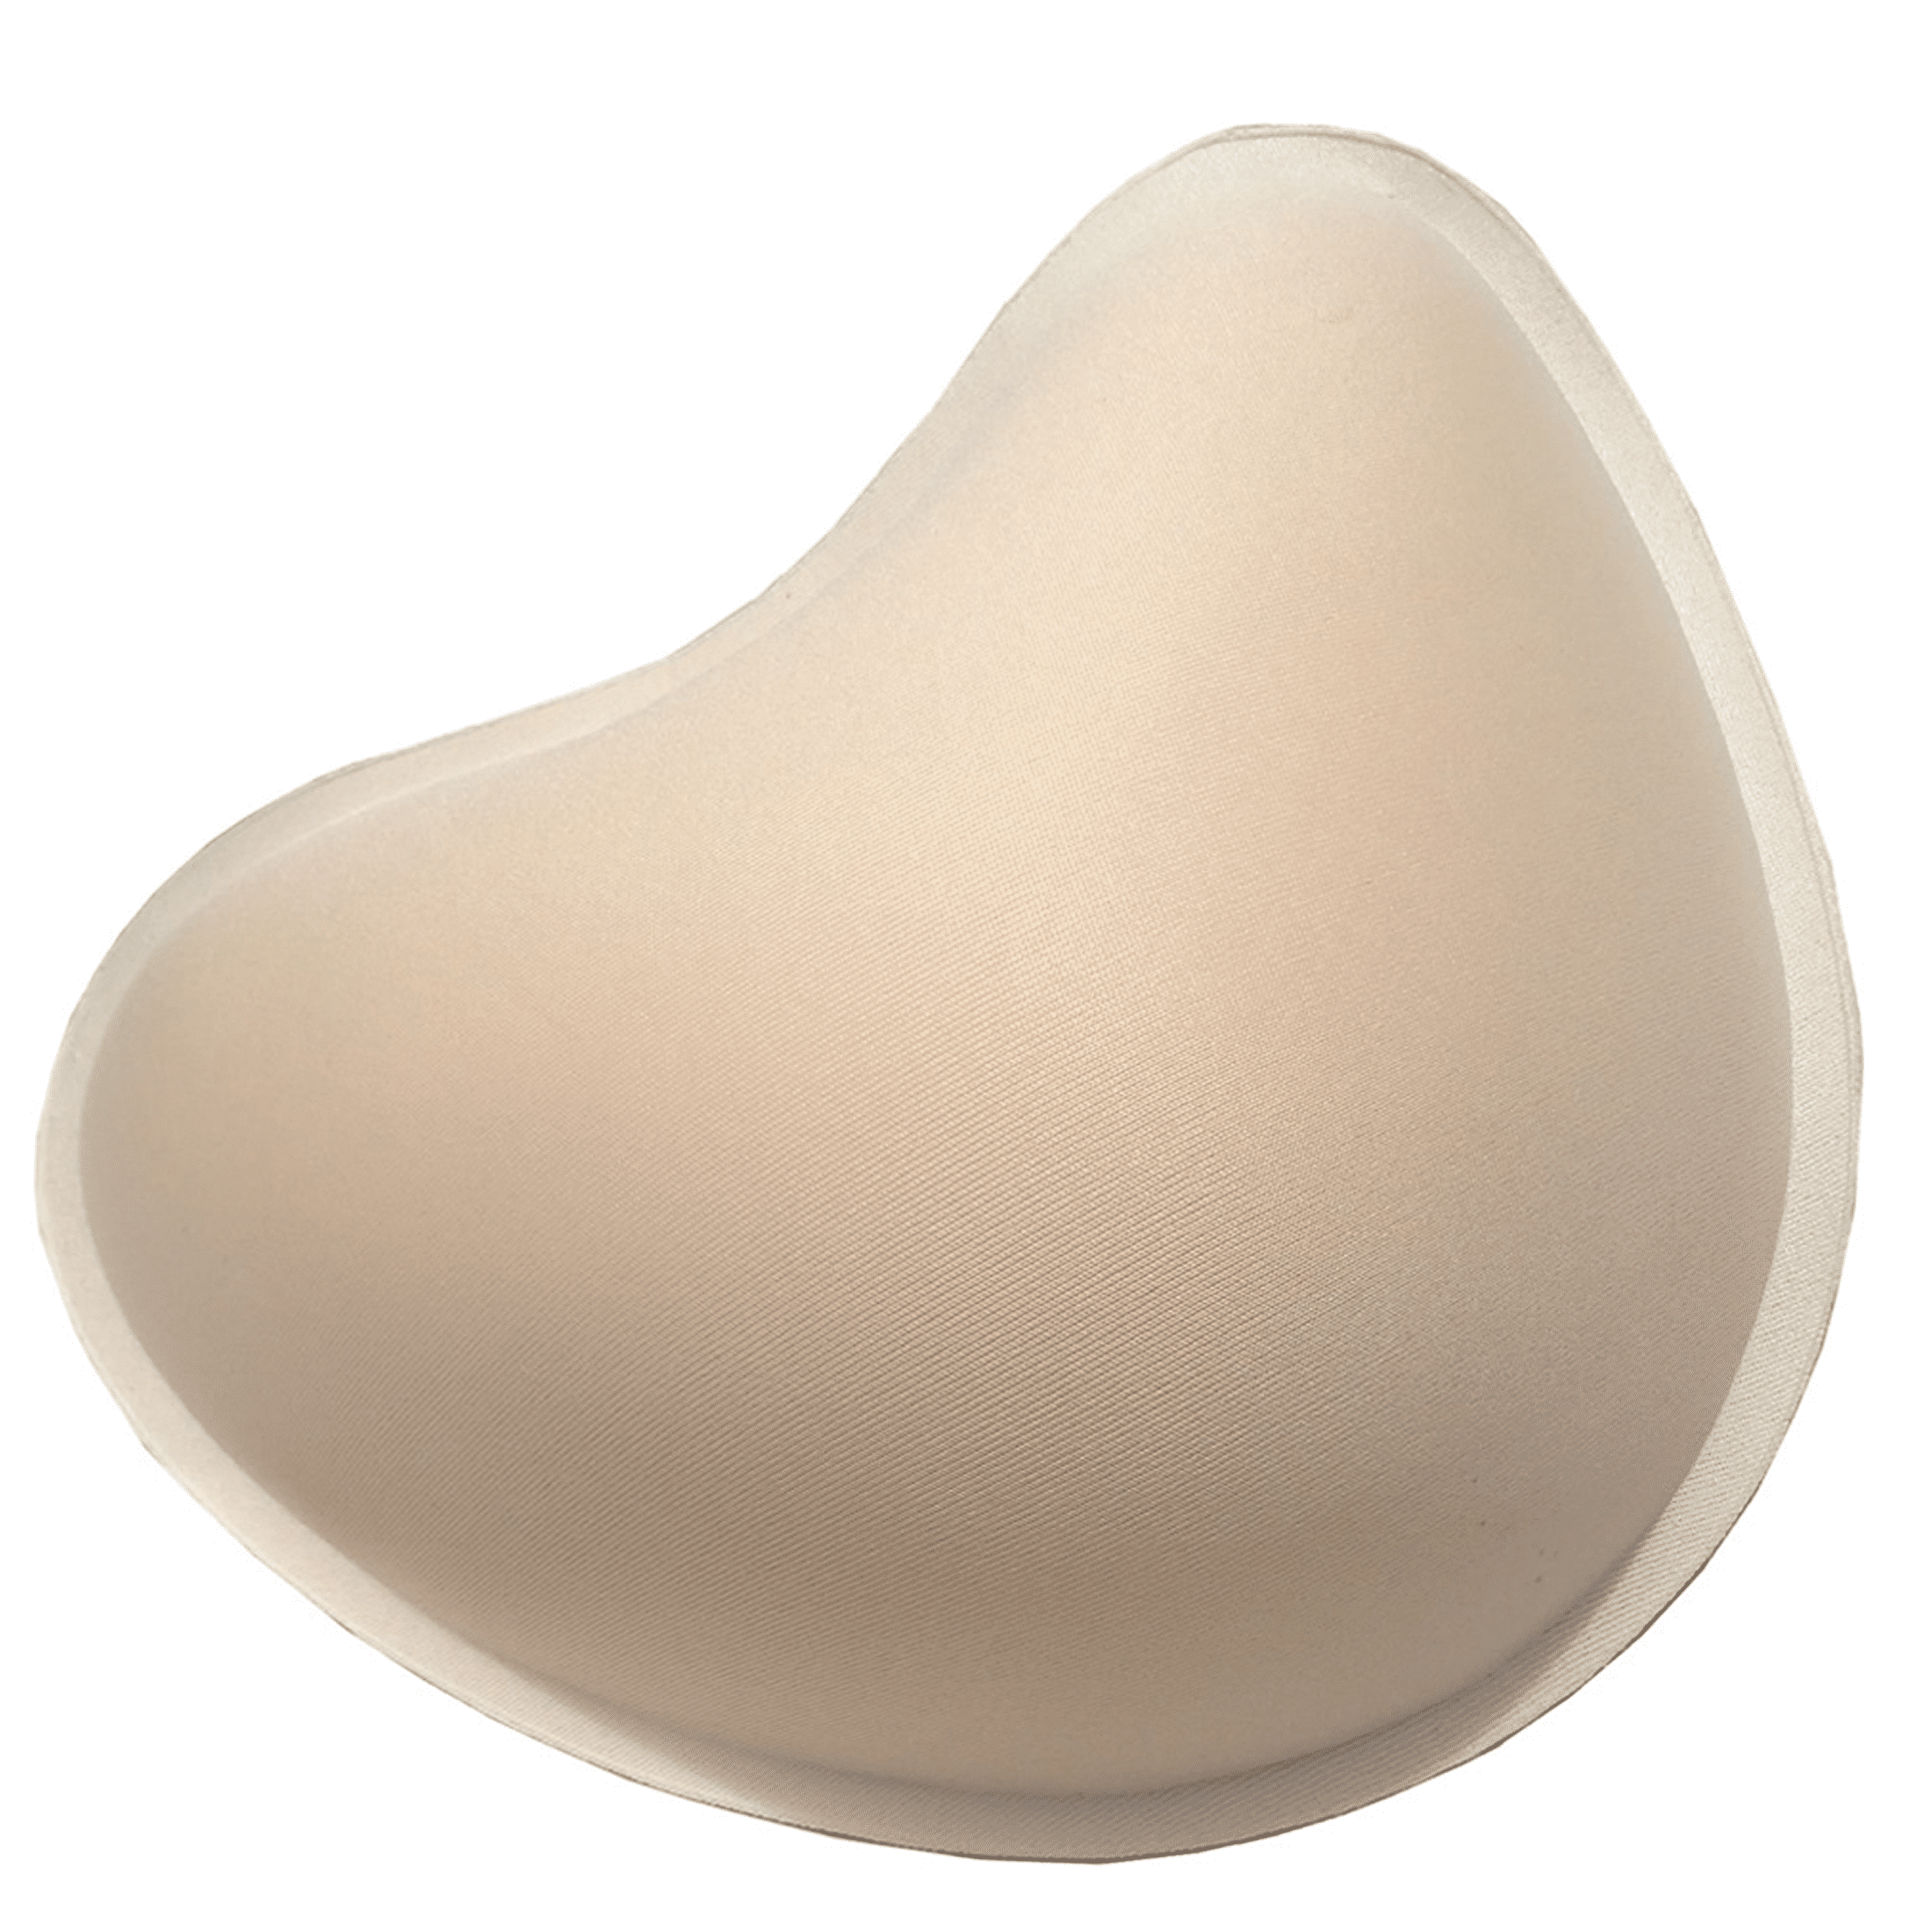 Hercicy 1 Pair Cotton Breast Forms Light Sponge Boobs Mastectomy Breast  Cancer S